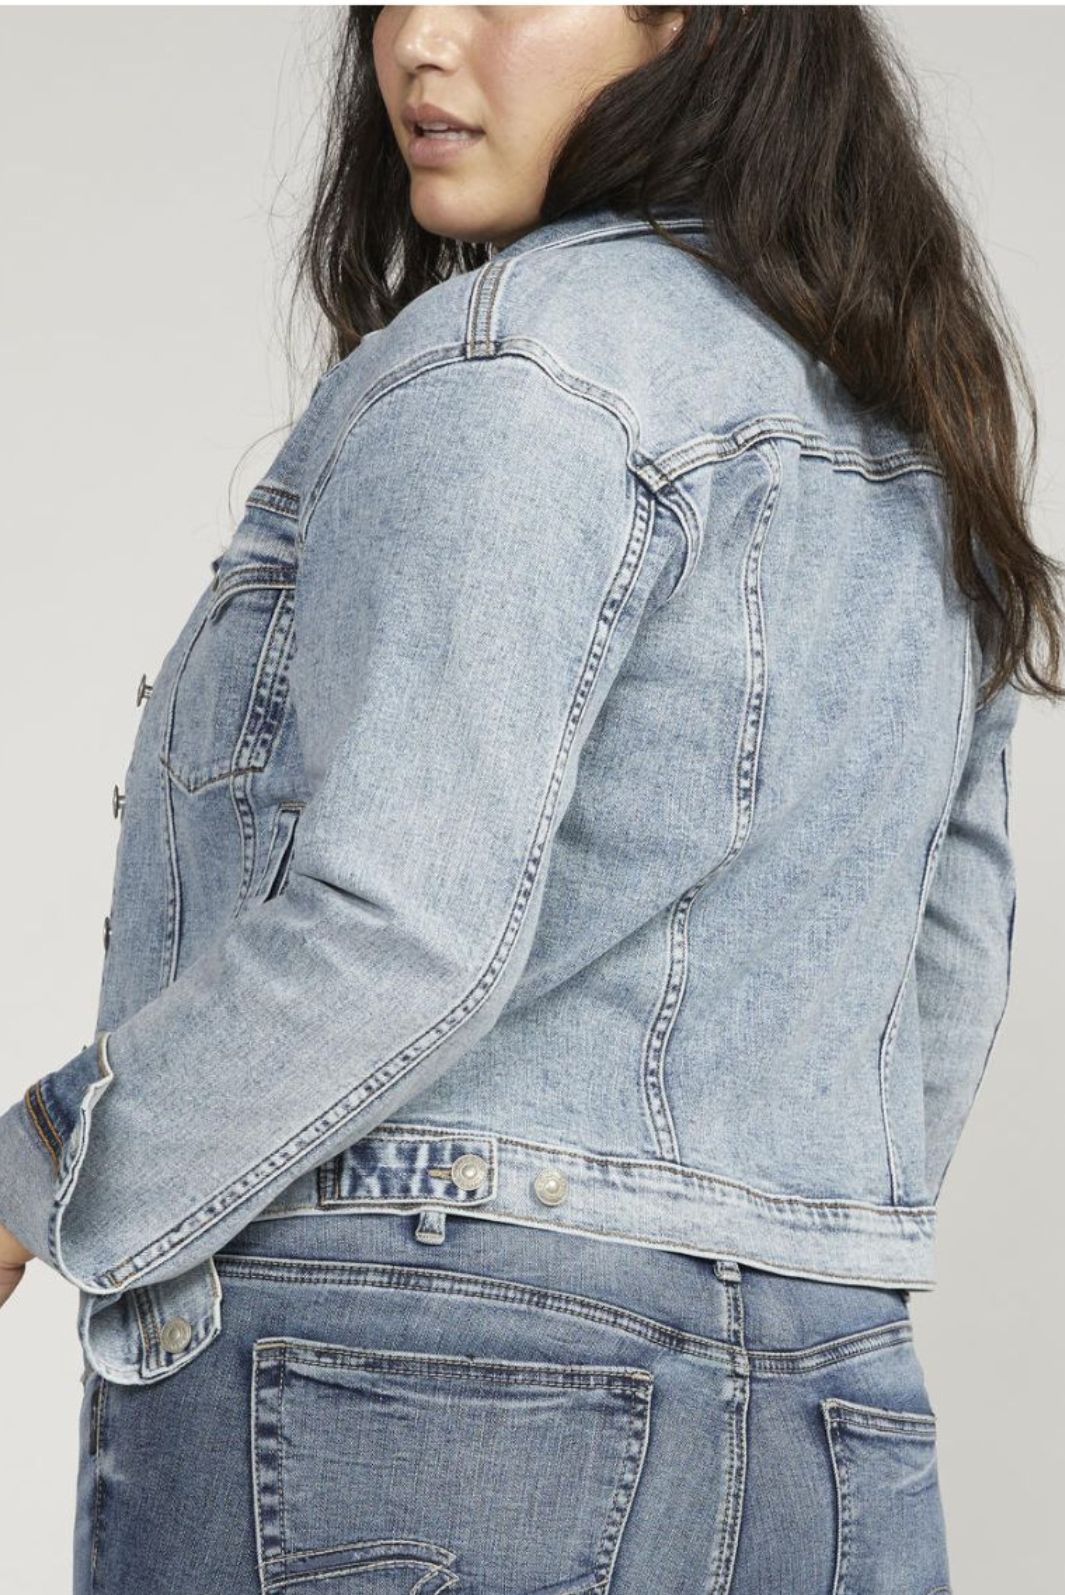 Silver Jeans Plus Size Fitted Denim Jacket